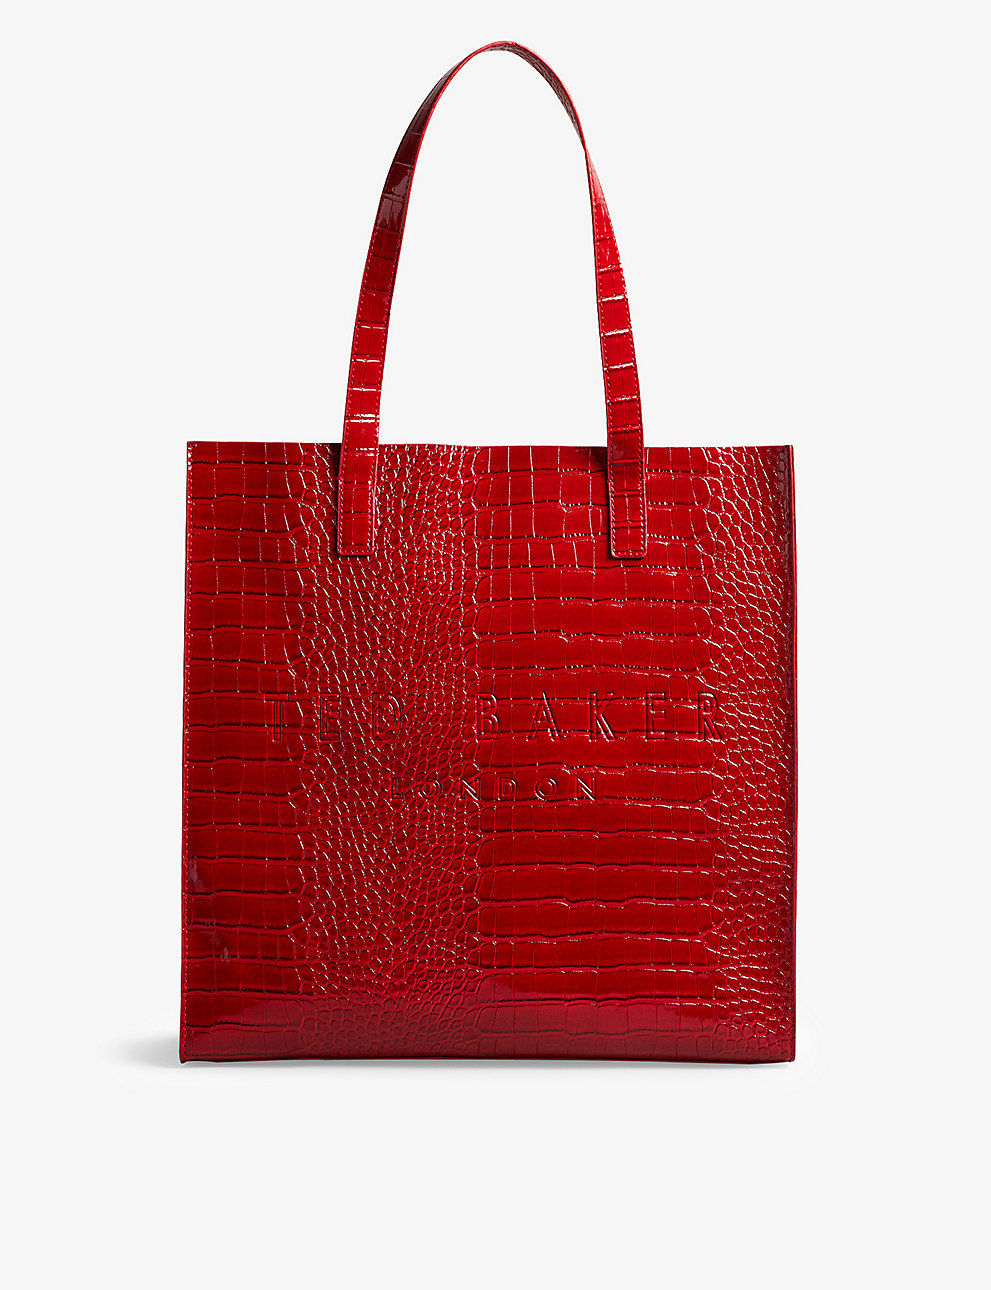 Croccon faux-leather shopper tote bag, Ted Baker